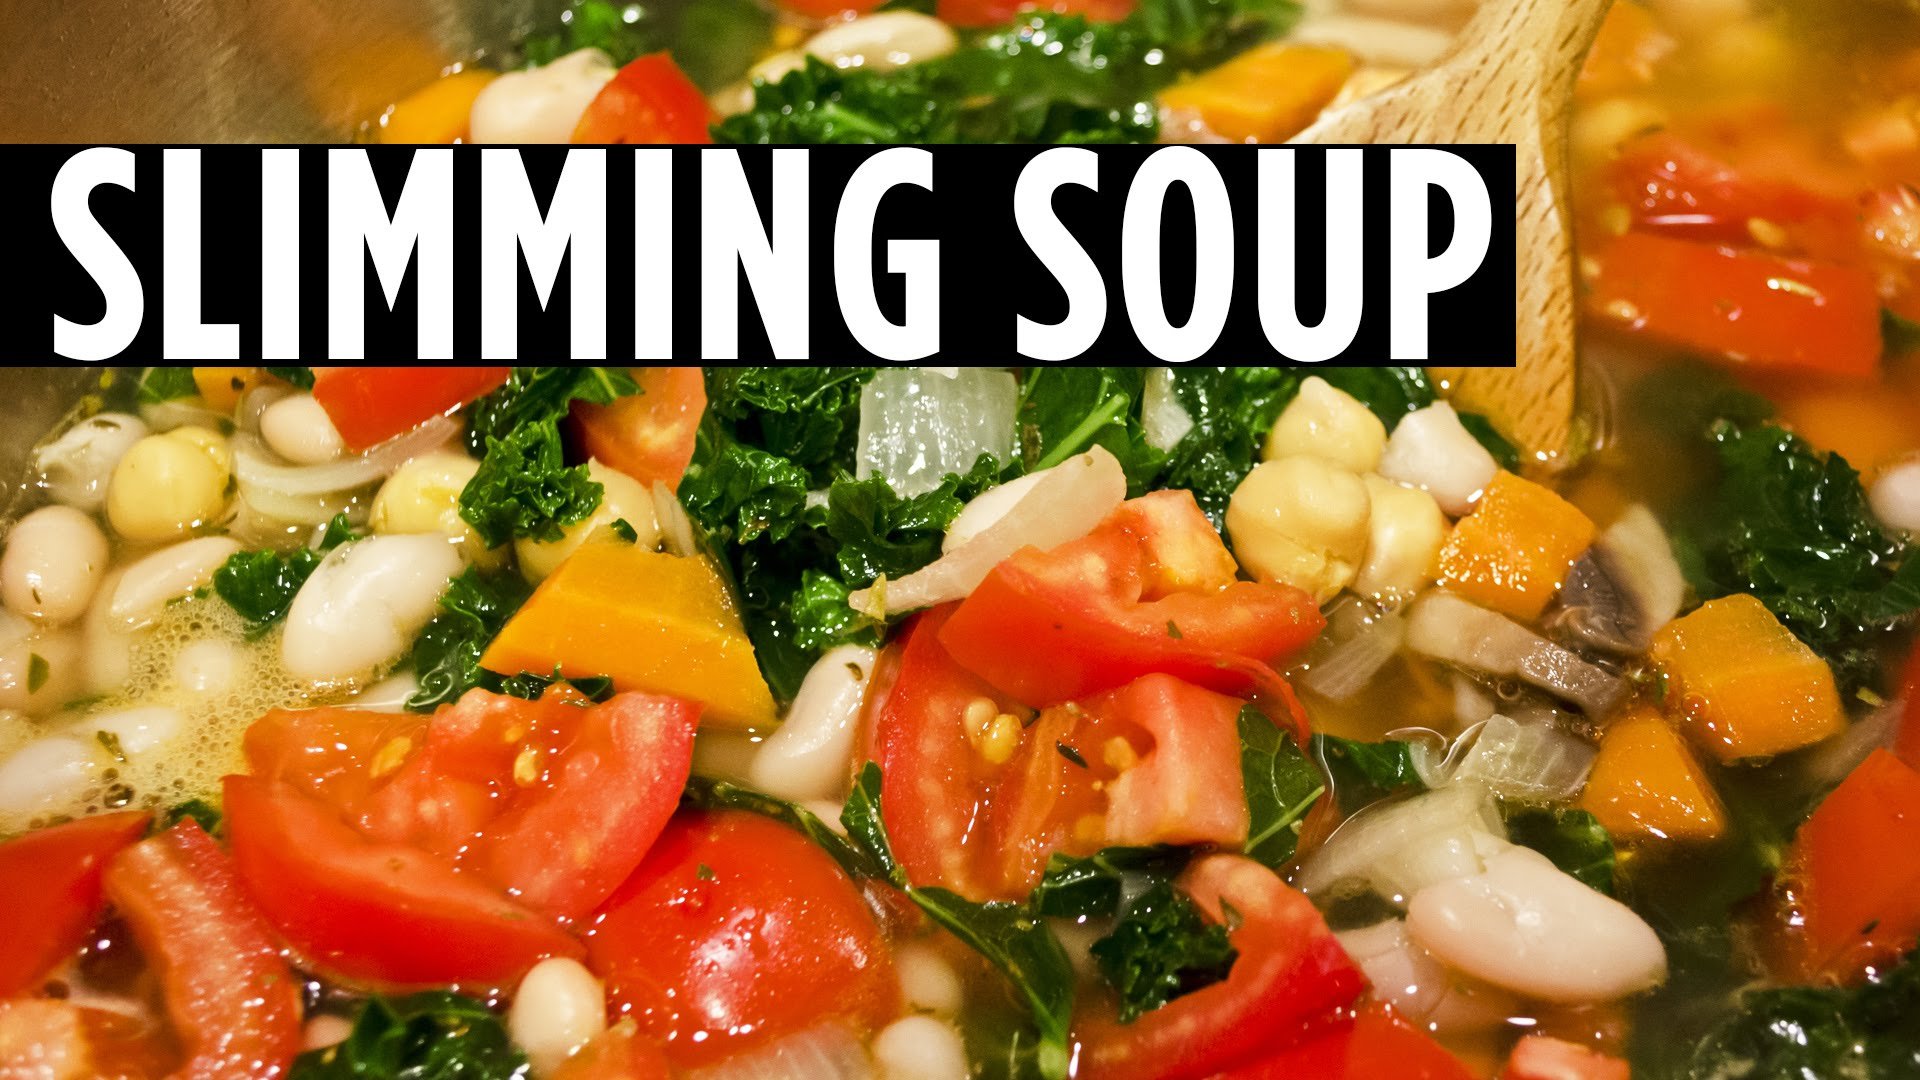 Lose Weight With This Slimming Soup Recipe (7 Day Diet ...